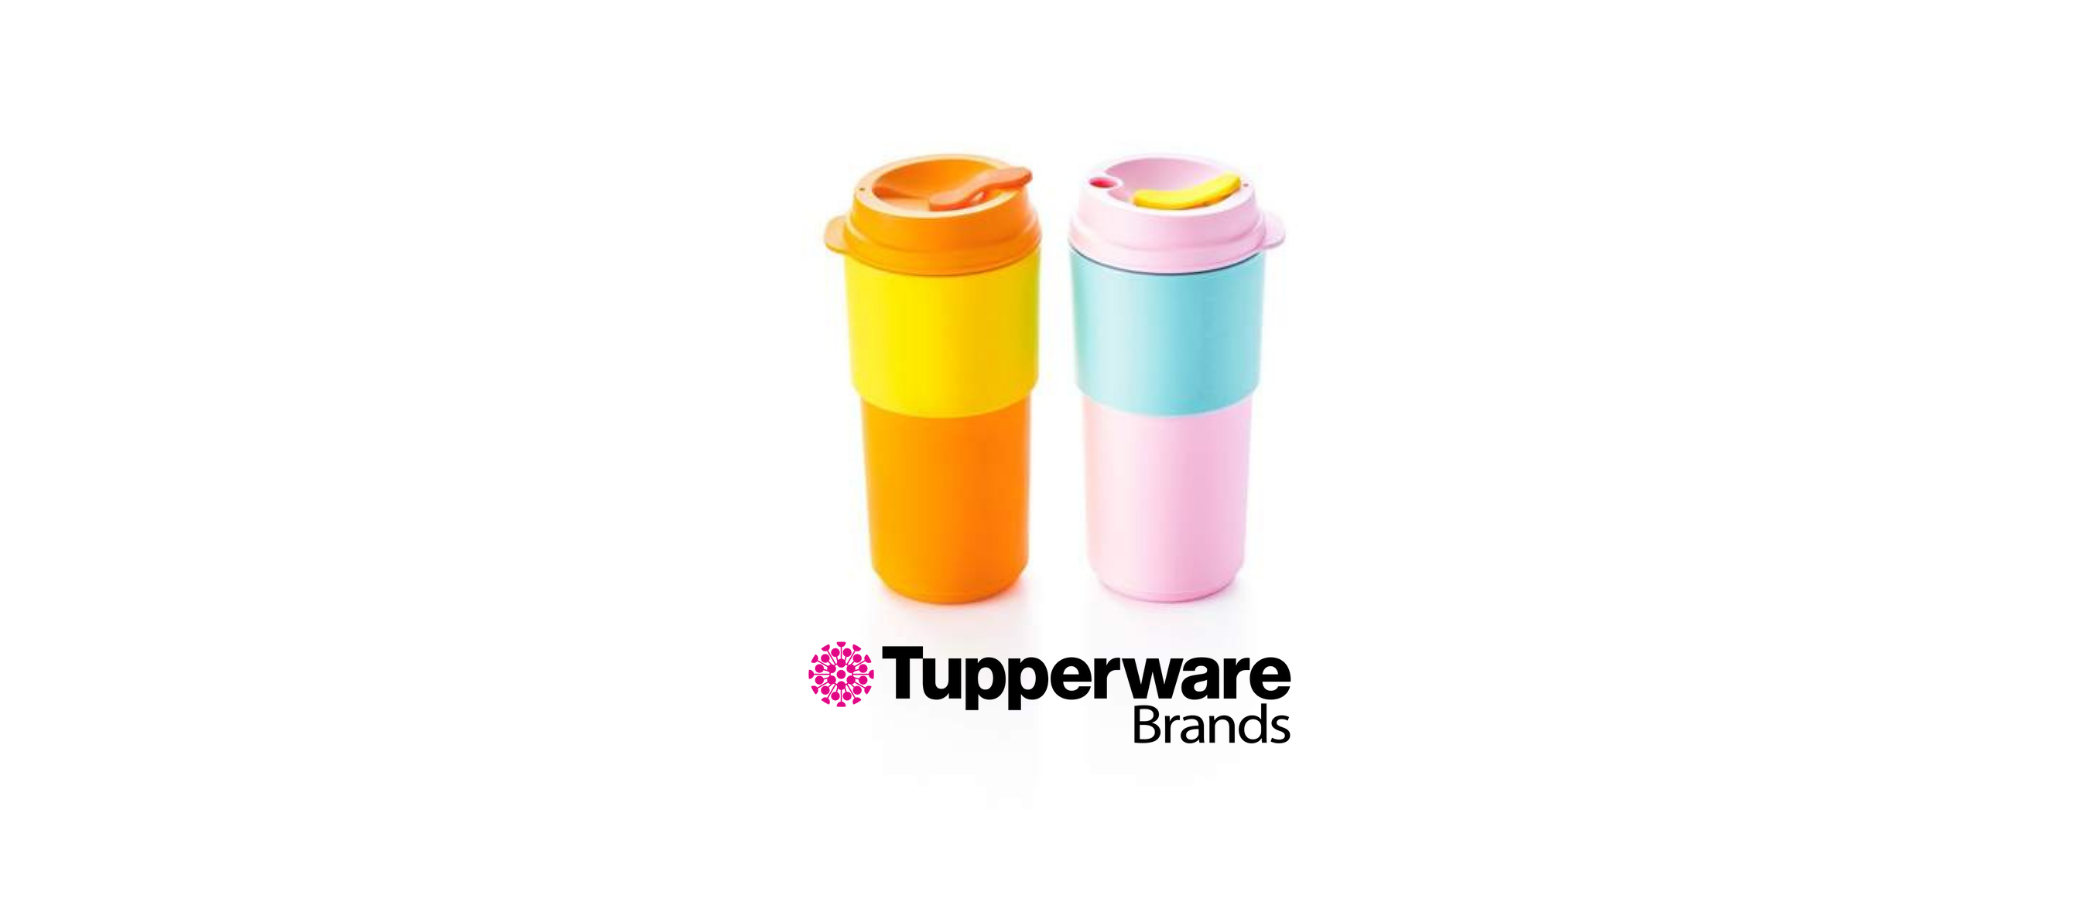 Fradrage Chaiselong hver for sig Tupperware Brands ECO+ Coffee To-Go Cup Honored in Fast Company's 2021  Innovation by Design Awards - Direct Selling News